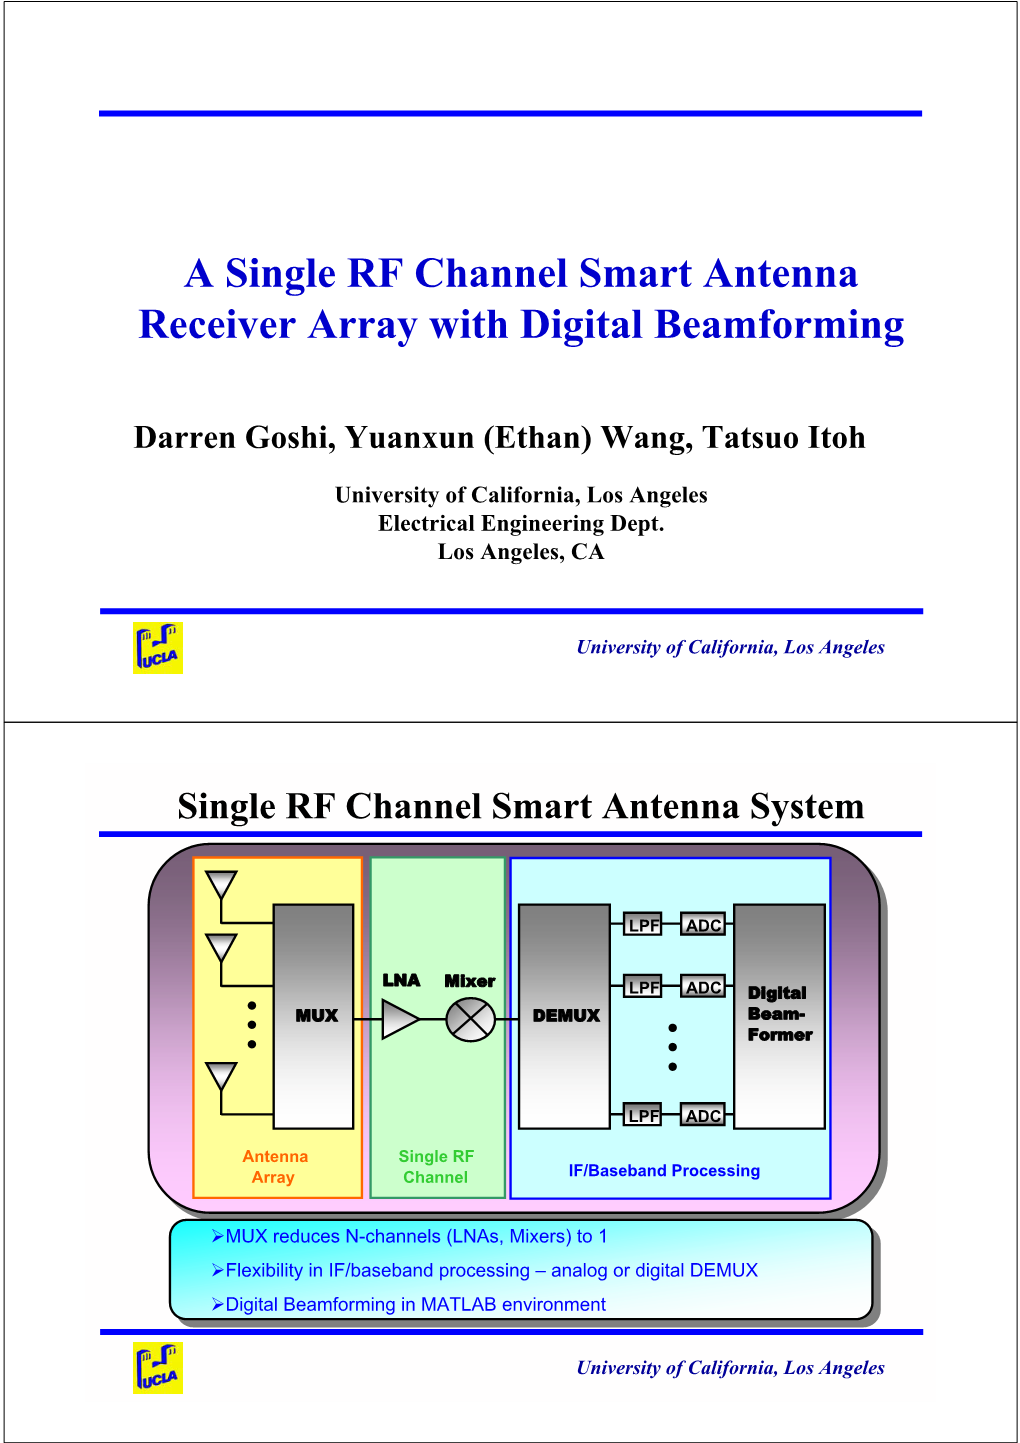 A Single RF Channel Smart Antenna Receiver Array with Digital Beamforming